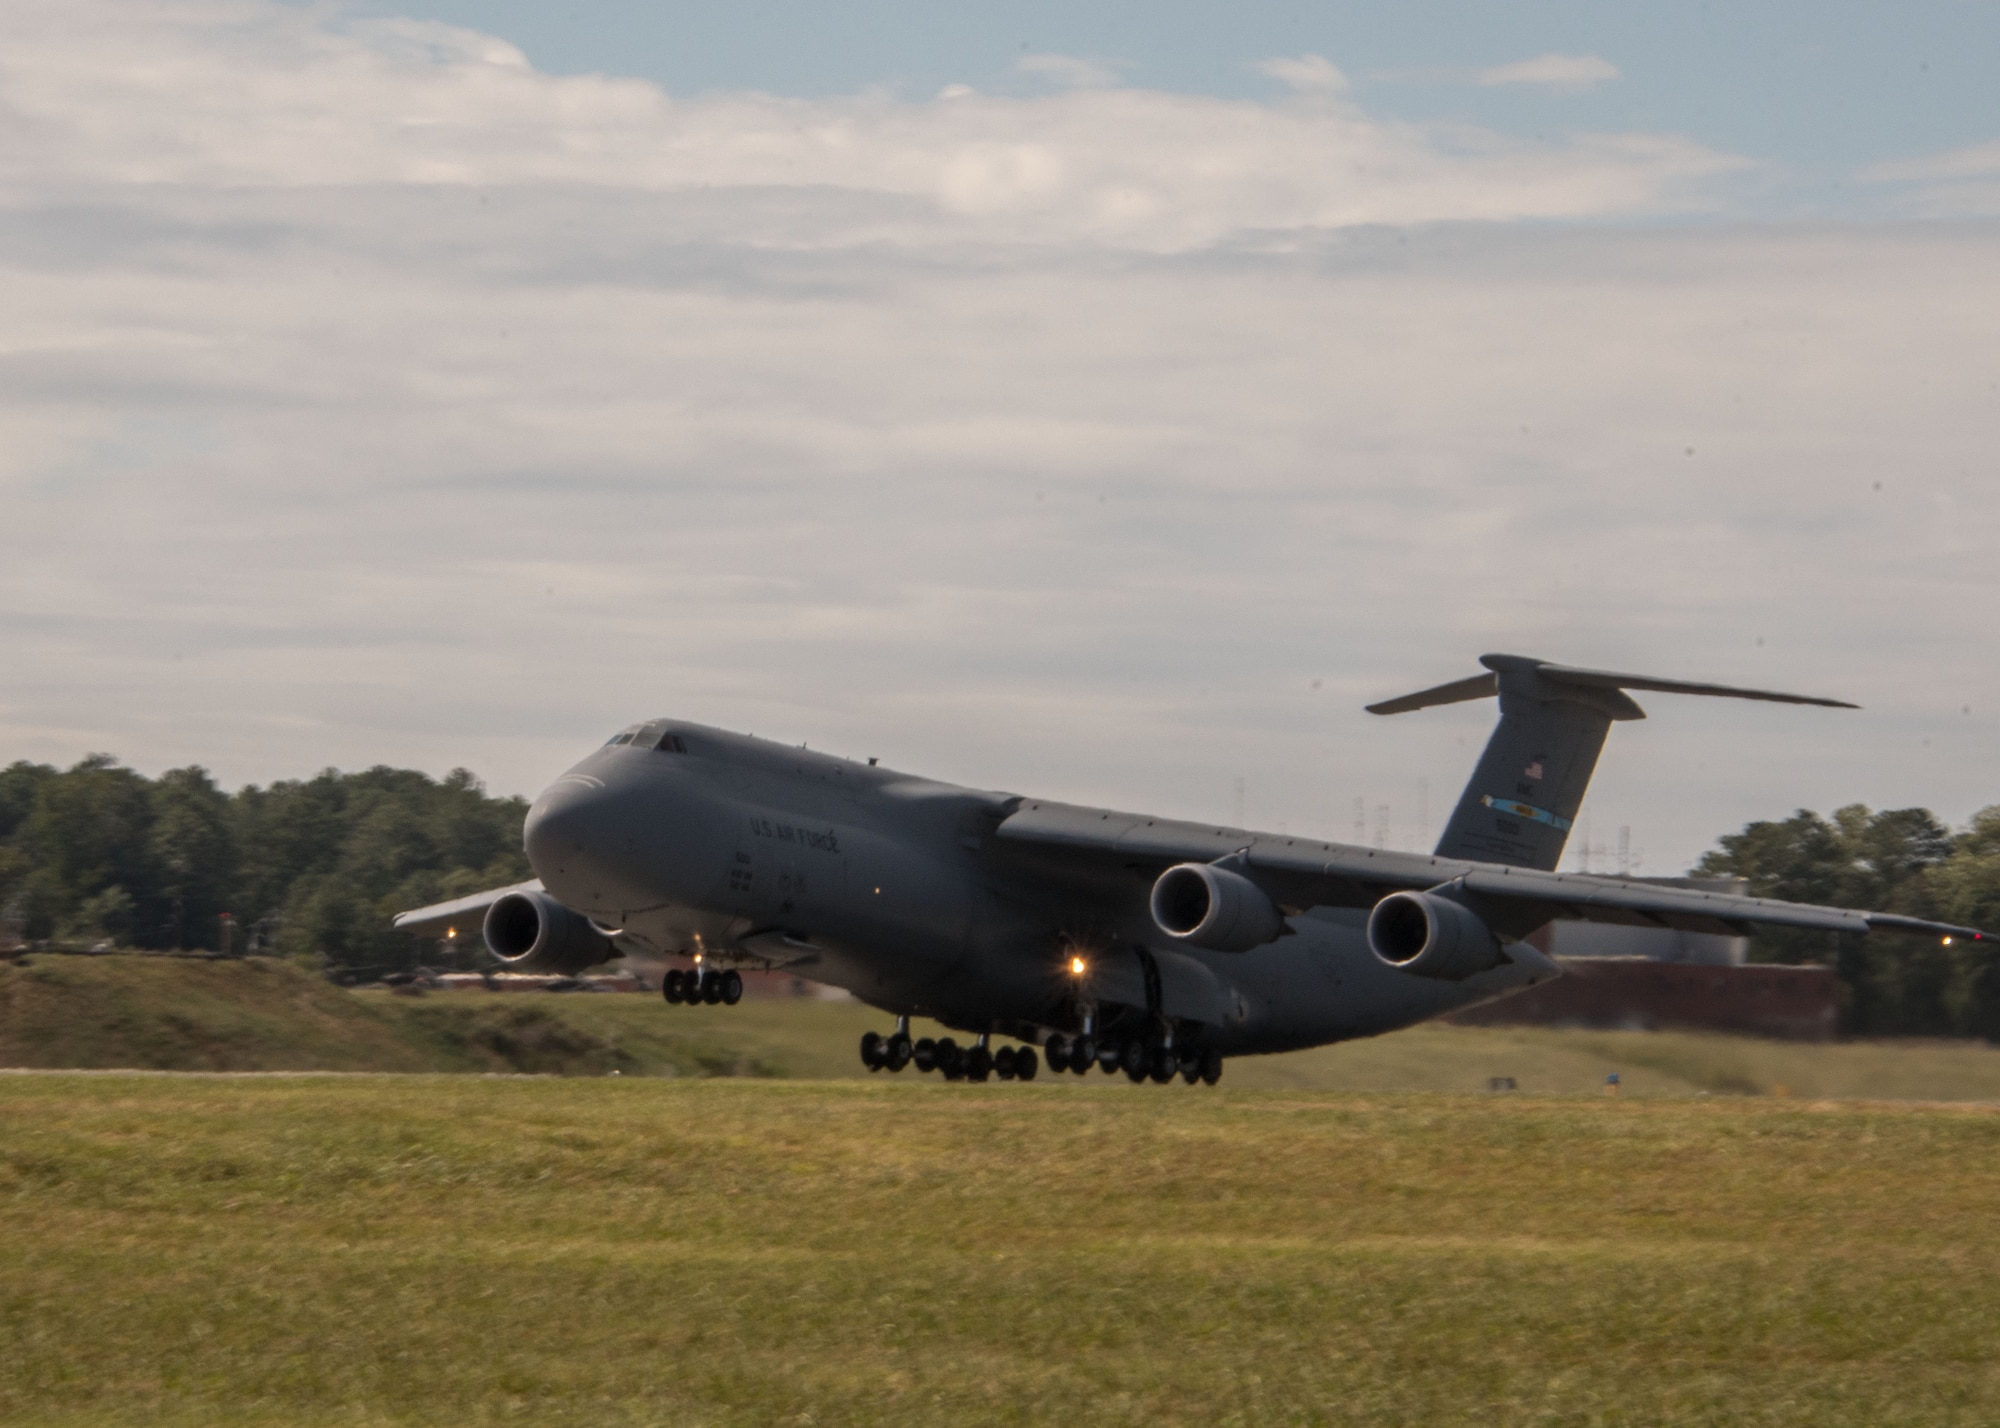 A C-5M Super Galaxy from Dover Air Force Base, Del. takes off at Dobbins Air Reserve Base, Ga. Oct. 2, 2017. The plane took vital communication equipment as well as AT&T Network Disaster Recovery Team members to provide communication support to Puerto Rico in the wake of Hurricane Maria’s destruction. (U.S. Air Force photo/Staff Sgt. Andrew Park)